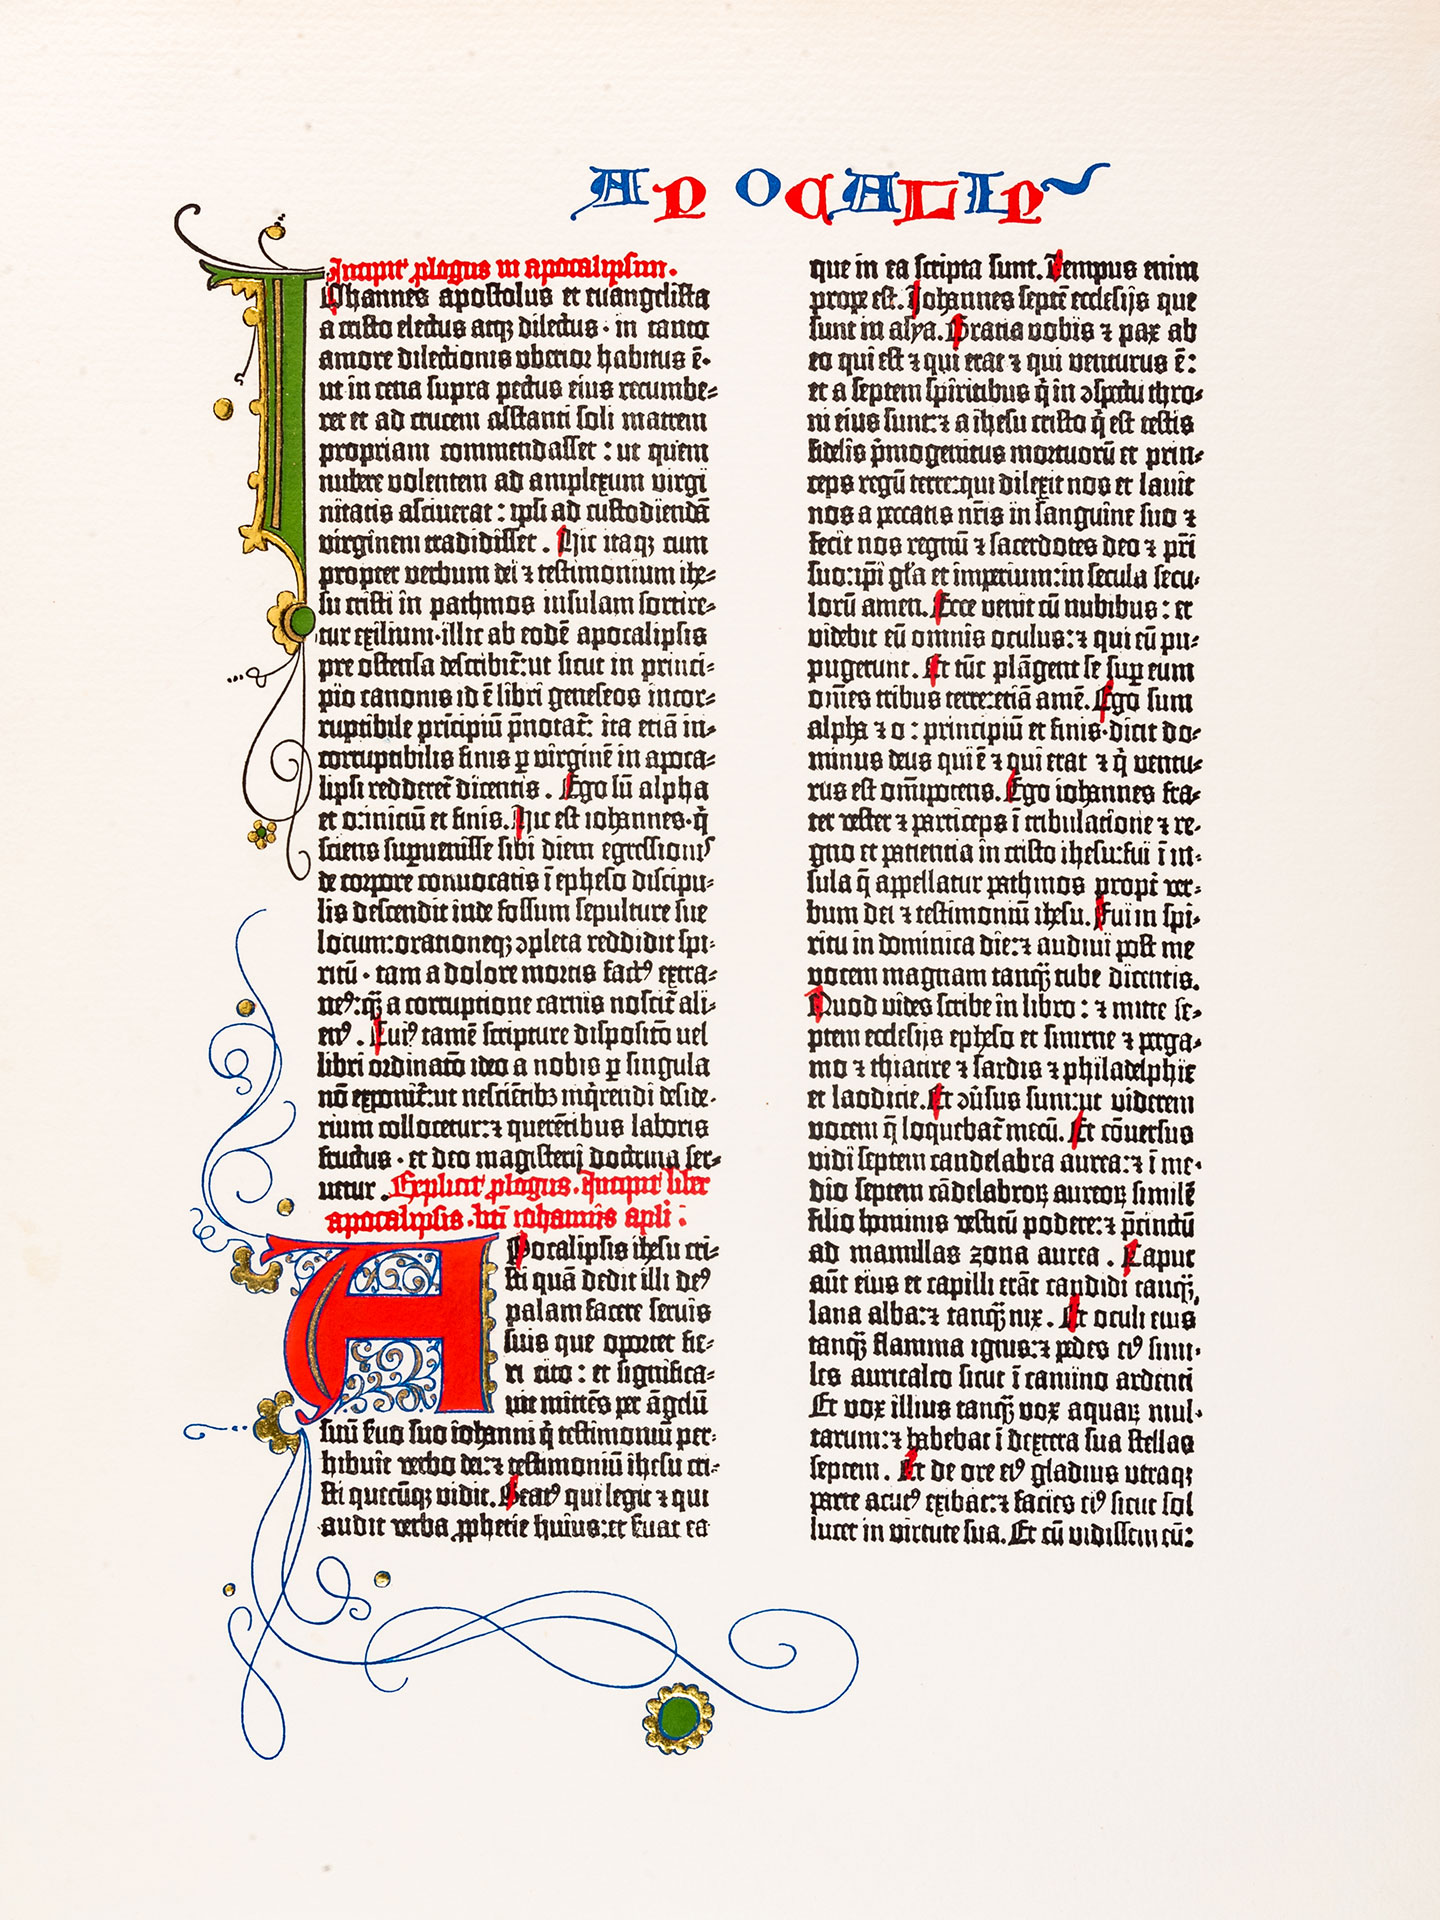 The Apocalypse. Press print from the Gutenberg Bible